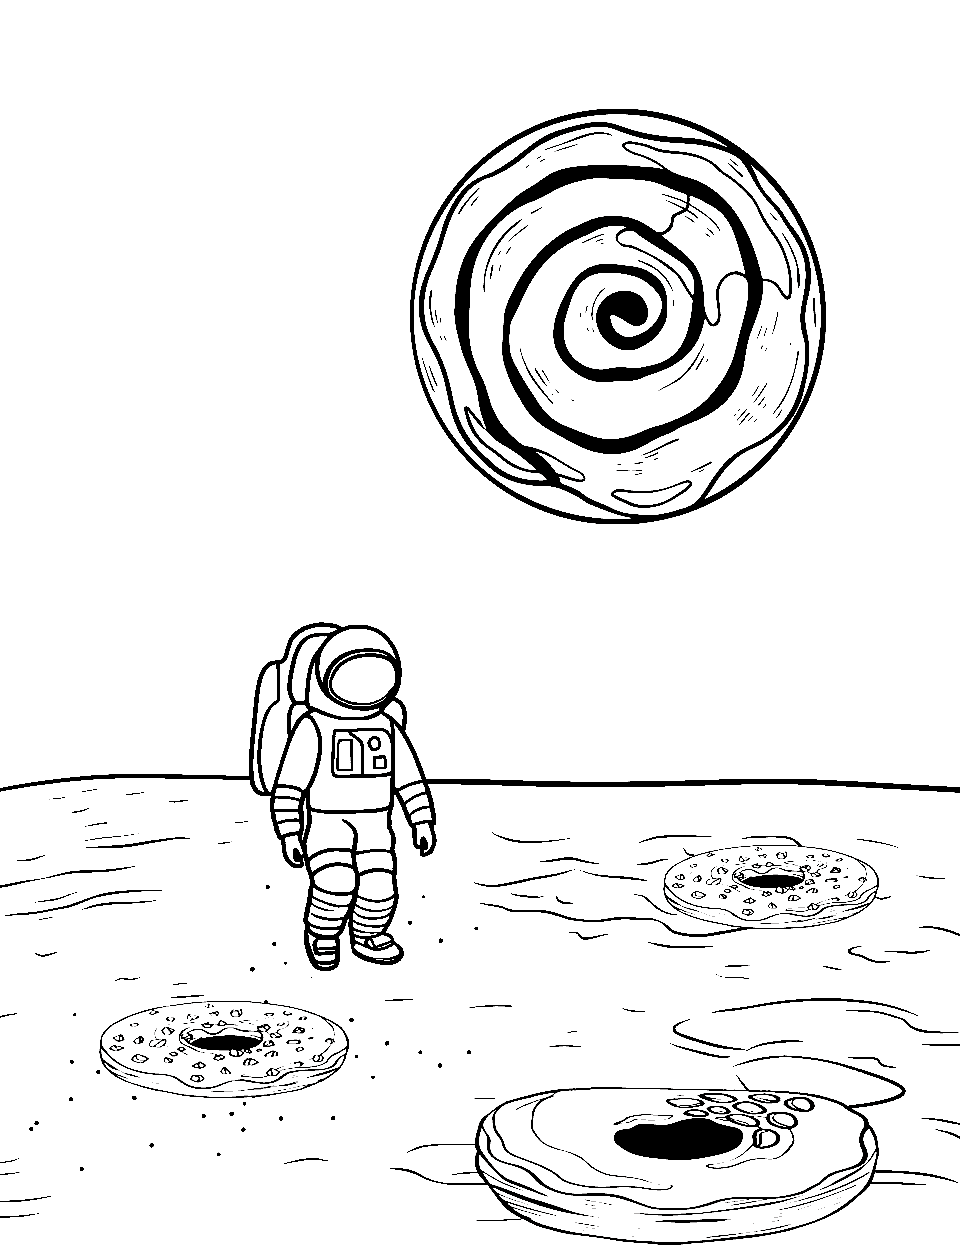 Lunar Landing with Donut Craters Coloring Page - Astronauts landing on a moon with donut-shaped craters.